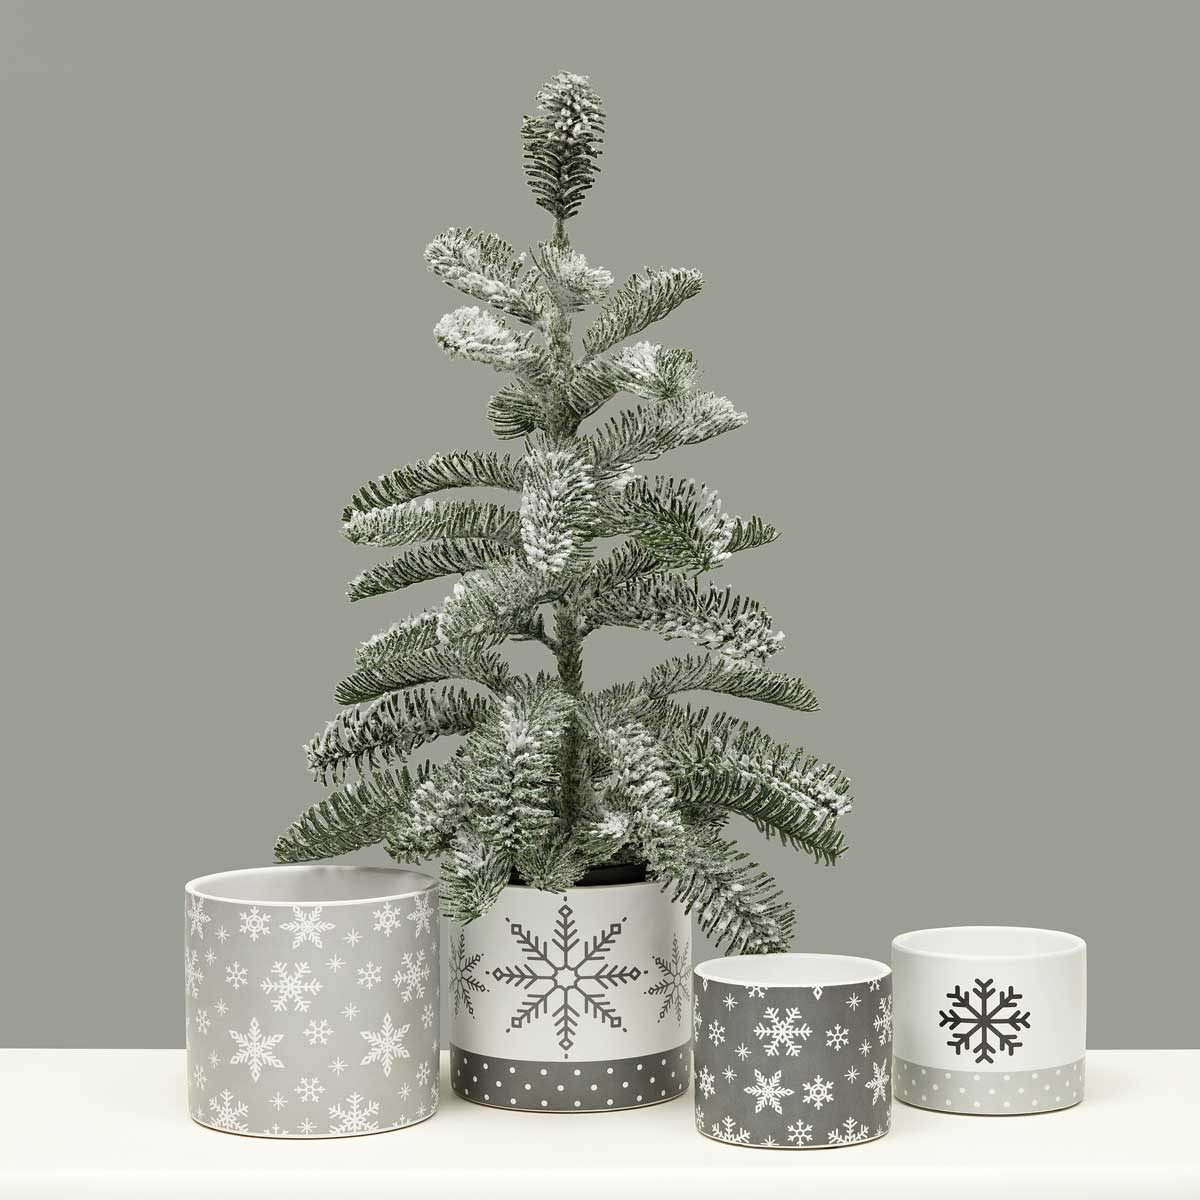 POT SCATTERED SNOWFLAKE LARGE 5.25IN X 4.75IN CERAMIC - Click Image to Close